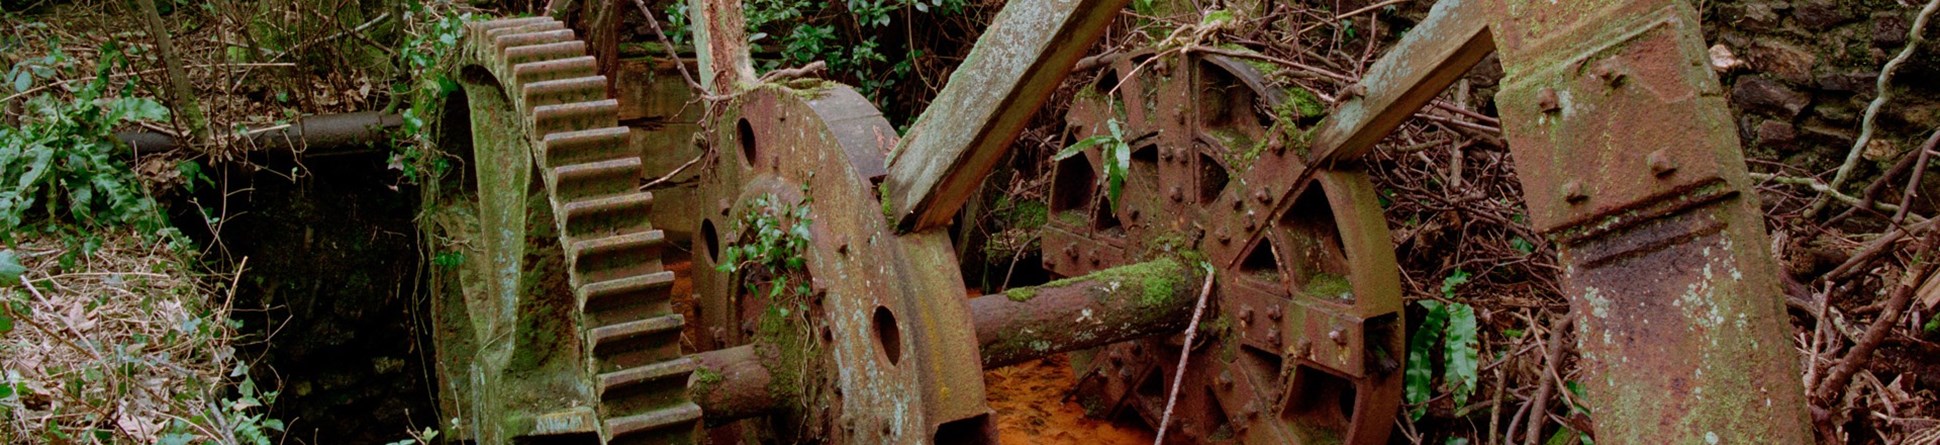 A detail photograph of rusting industrial machinery.